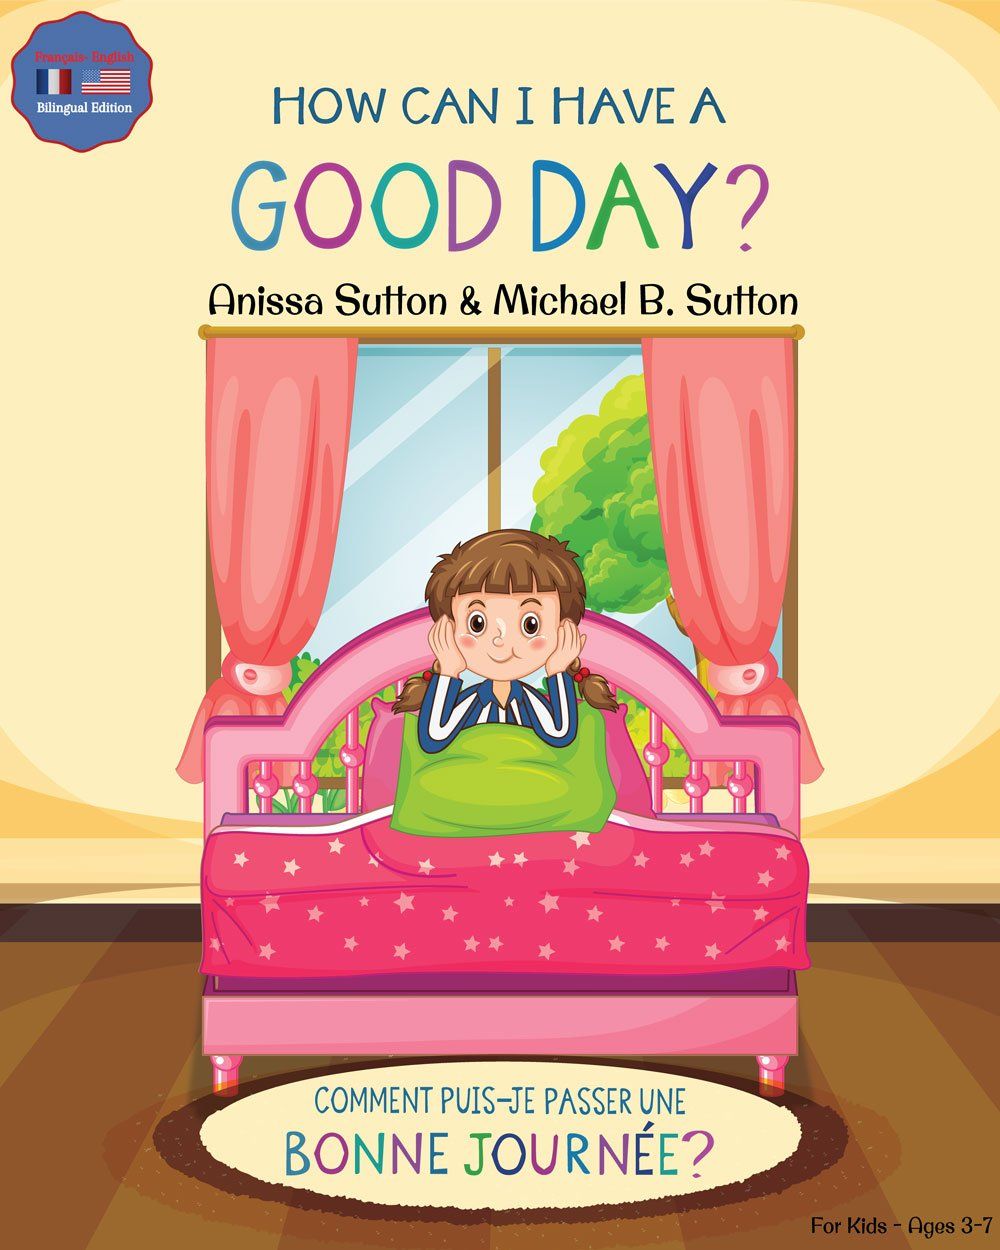 How can i have a good day ? by anissa sutton and michael b. sutton